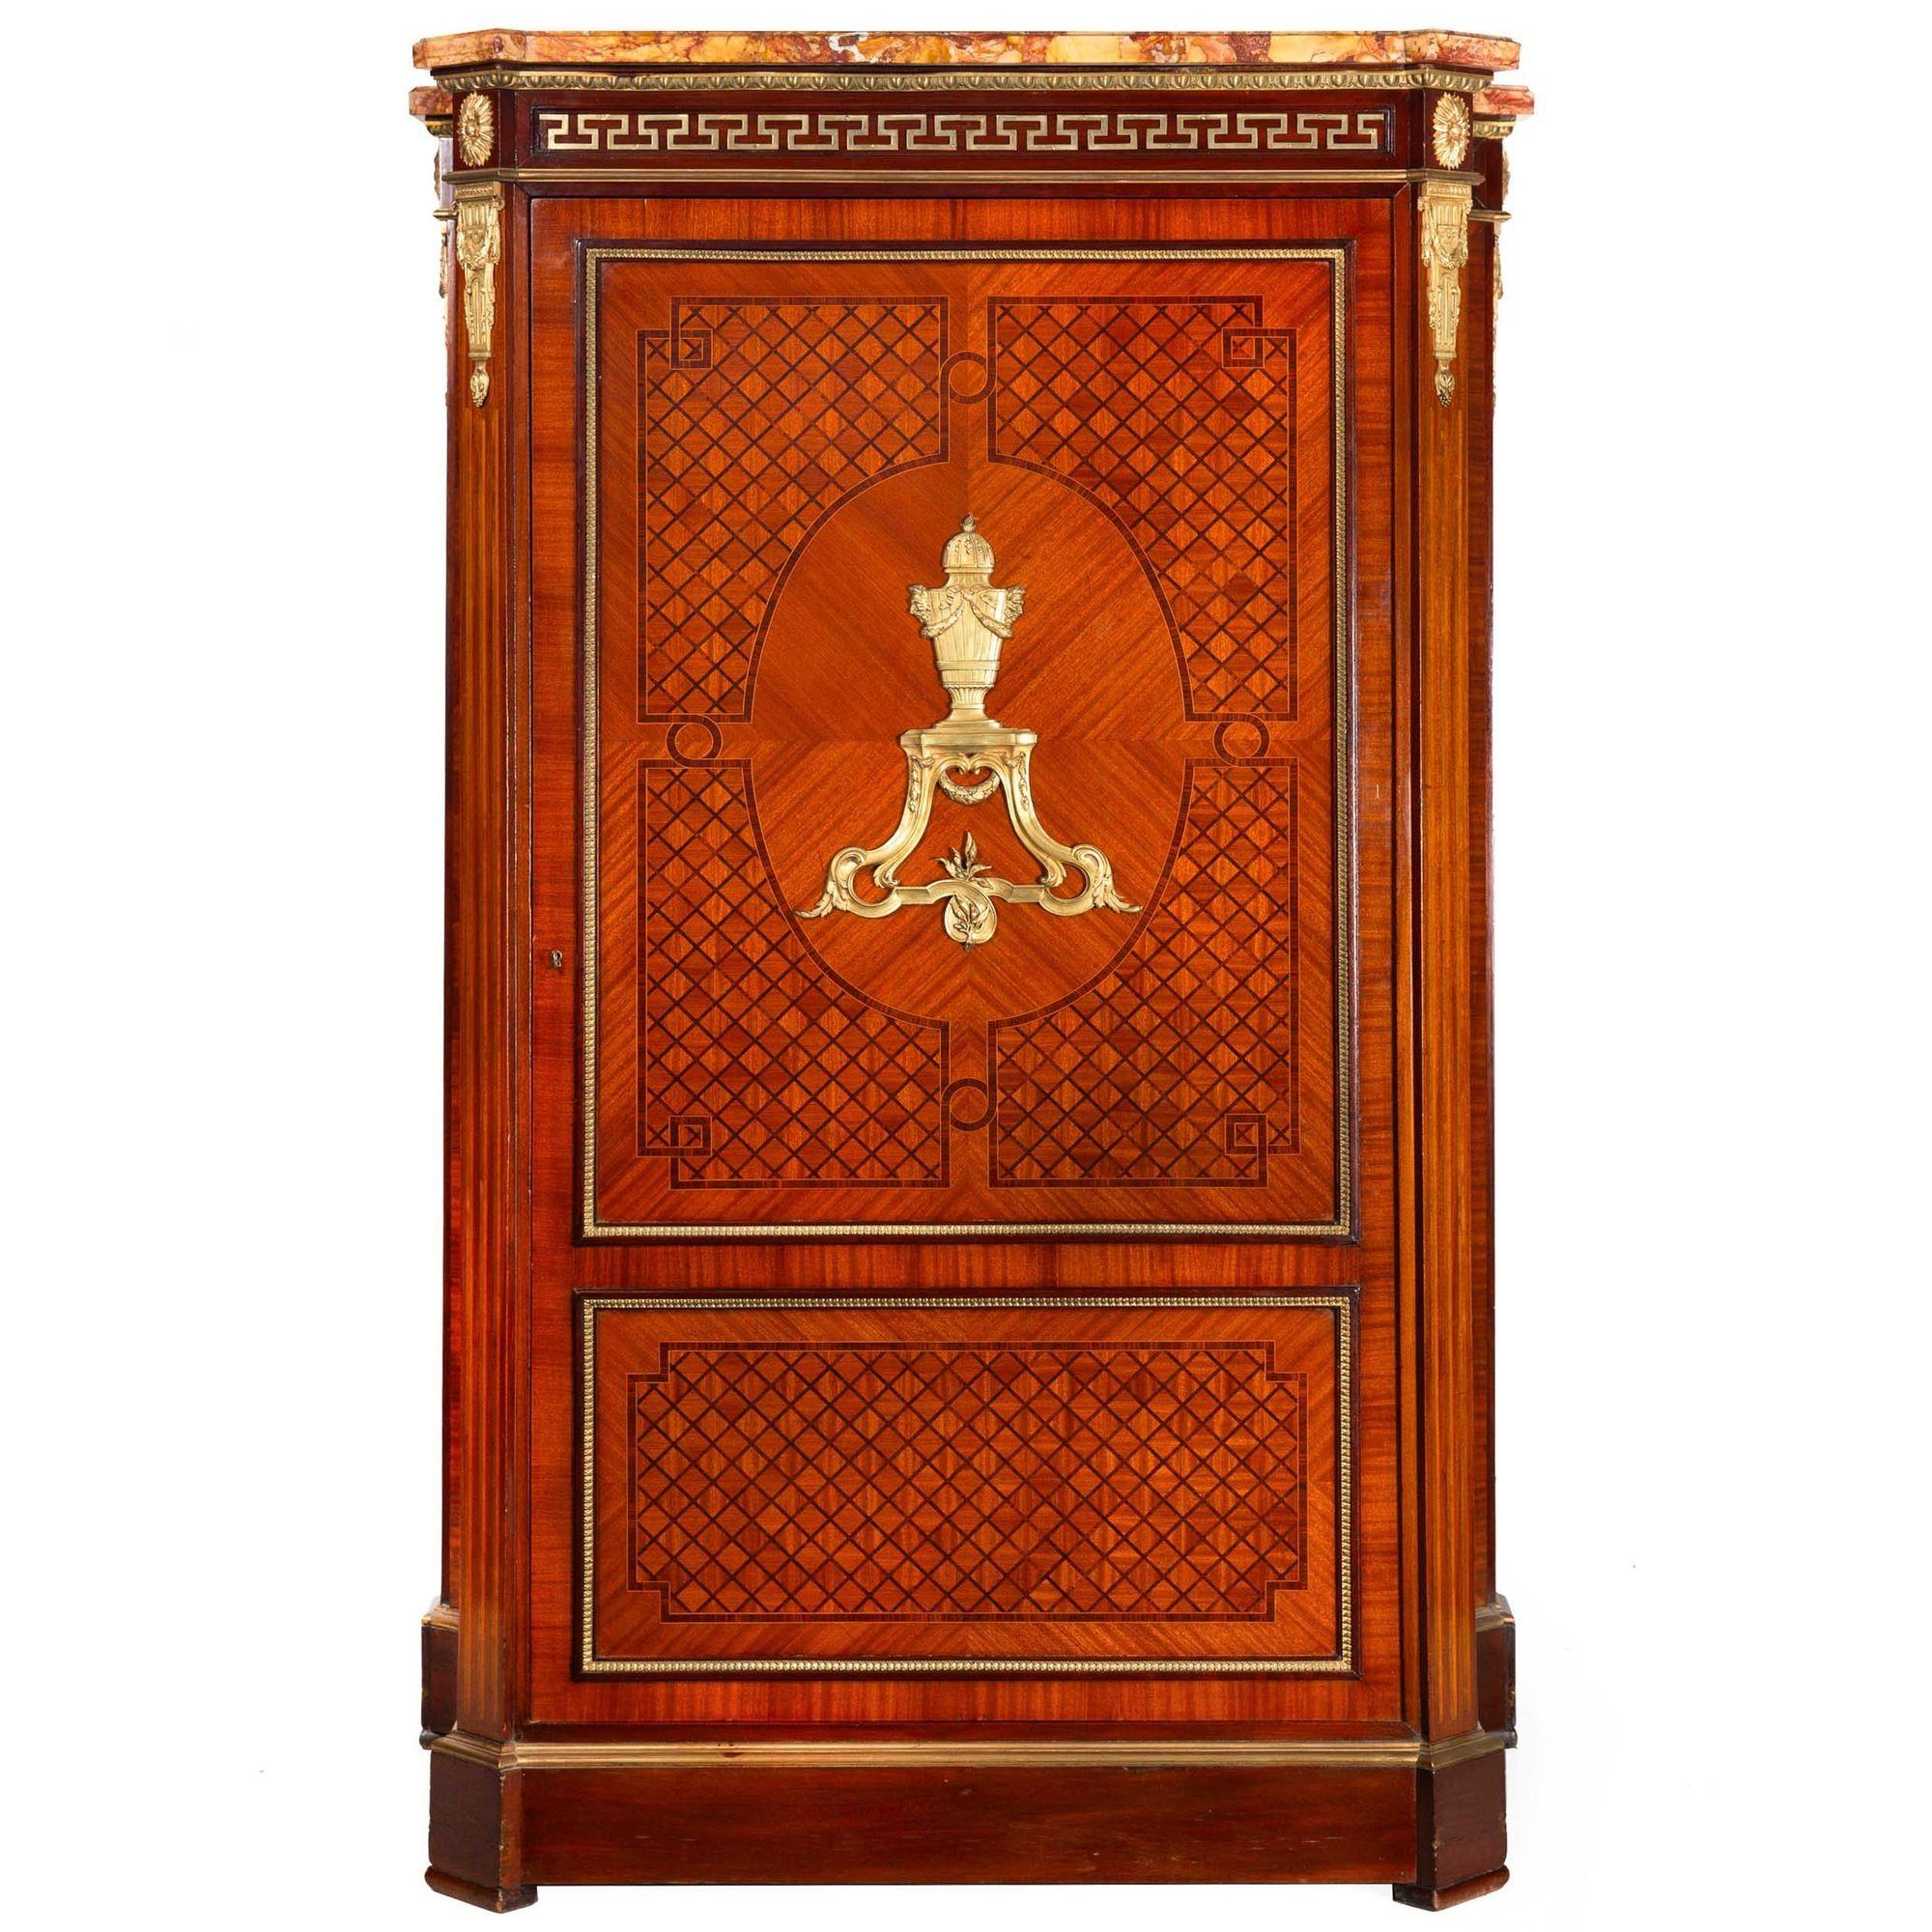 LOUIS XVI STYLE PARQUETRY-INLAID ORMOLU MOUNTED ONE-DOOR ARMOIRE
Paris, France circa 1880  lock stamped 